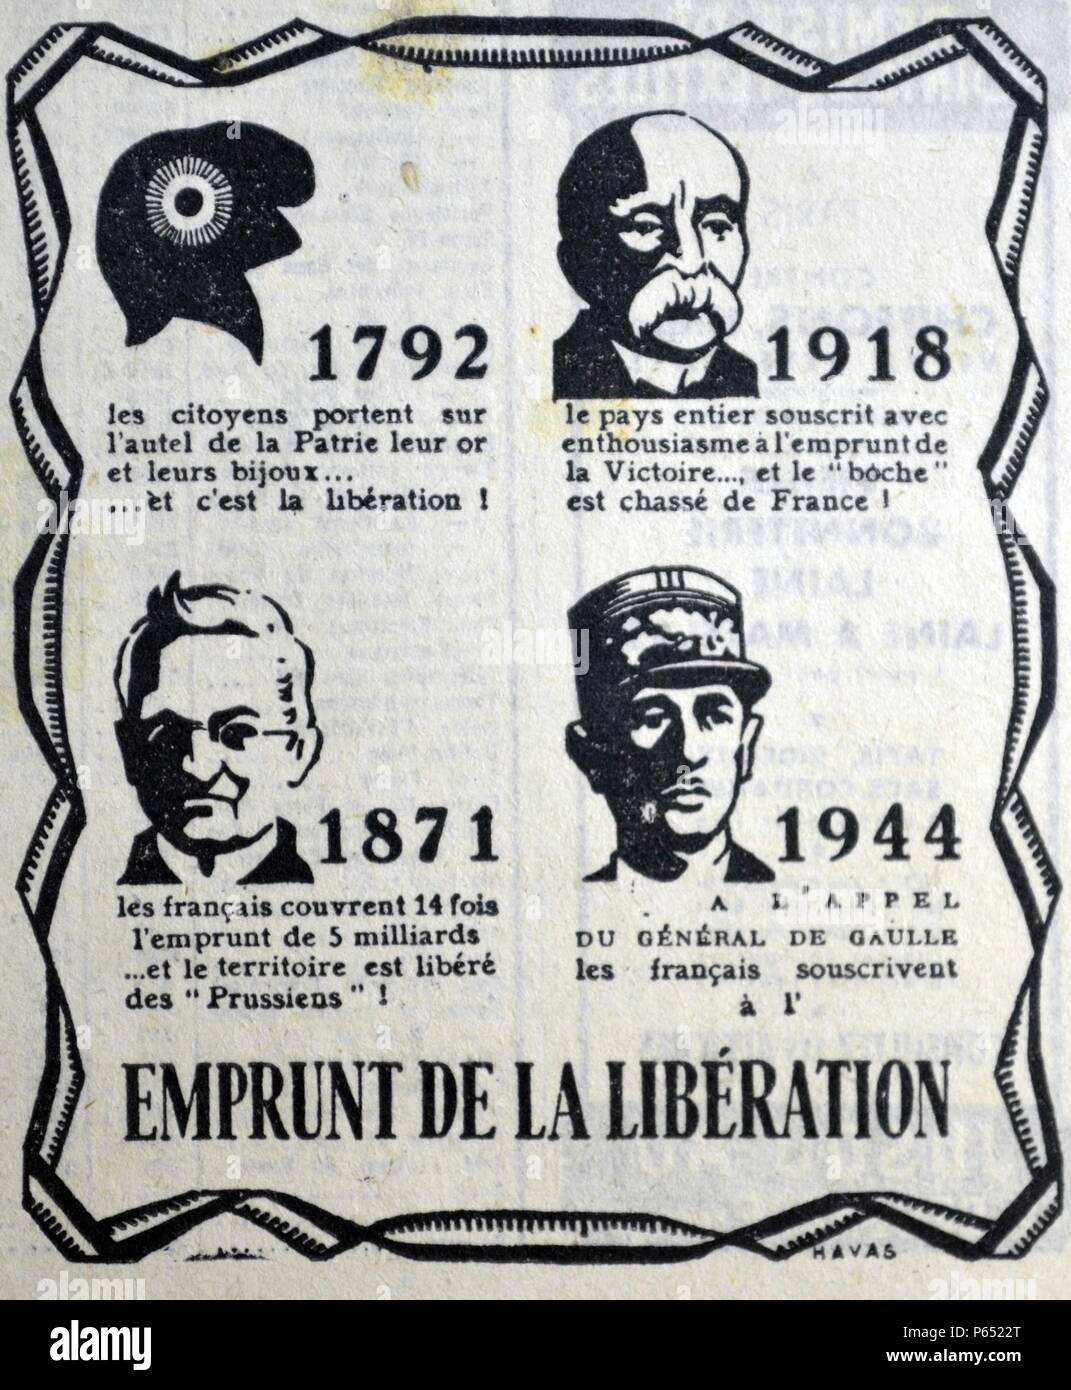 Poster depicting heroes of the French struggle against aggressors: Left top: the cap of liberty 1792;top right Georges Clemenceau;Bottom left: Adolphe Thiers Paris commune;and Bottom right General de Gaulle world war Two. Stock Photo